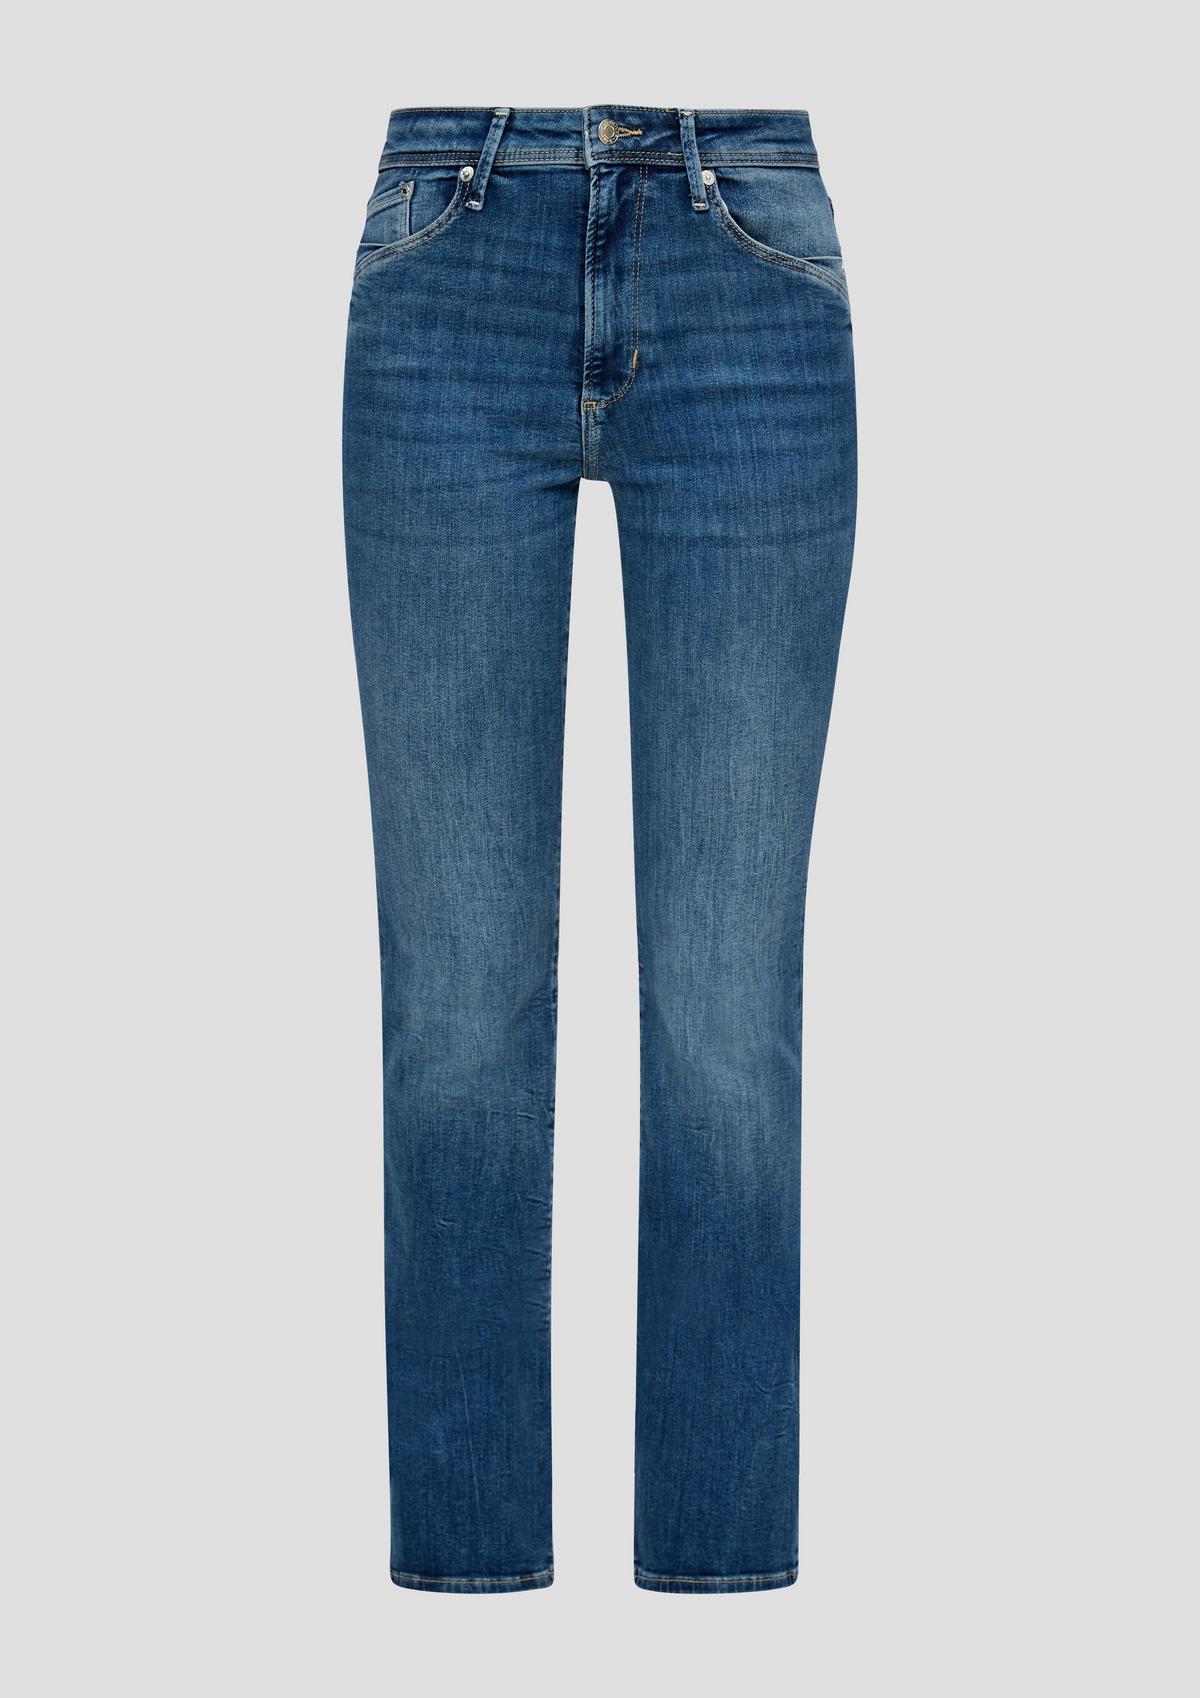 s.Oliver Beverly jeans / slim fit / high rise / bootcut leg